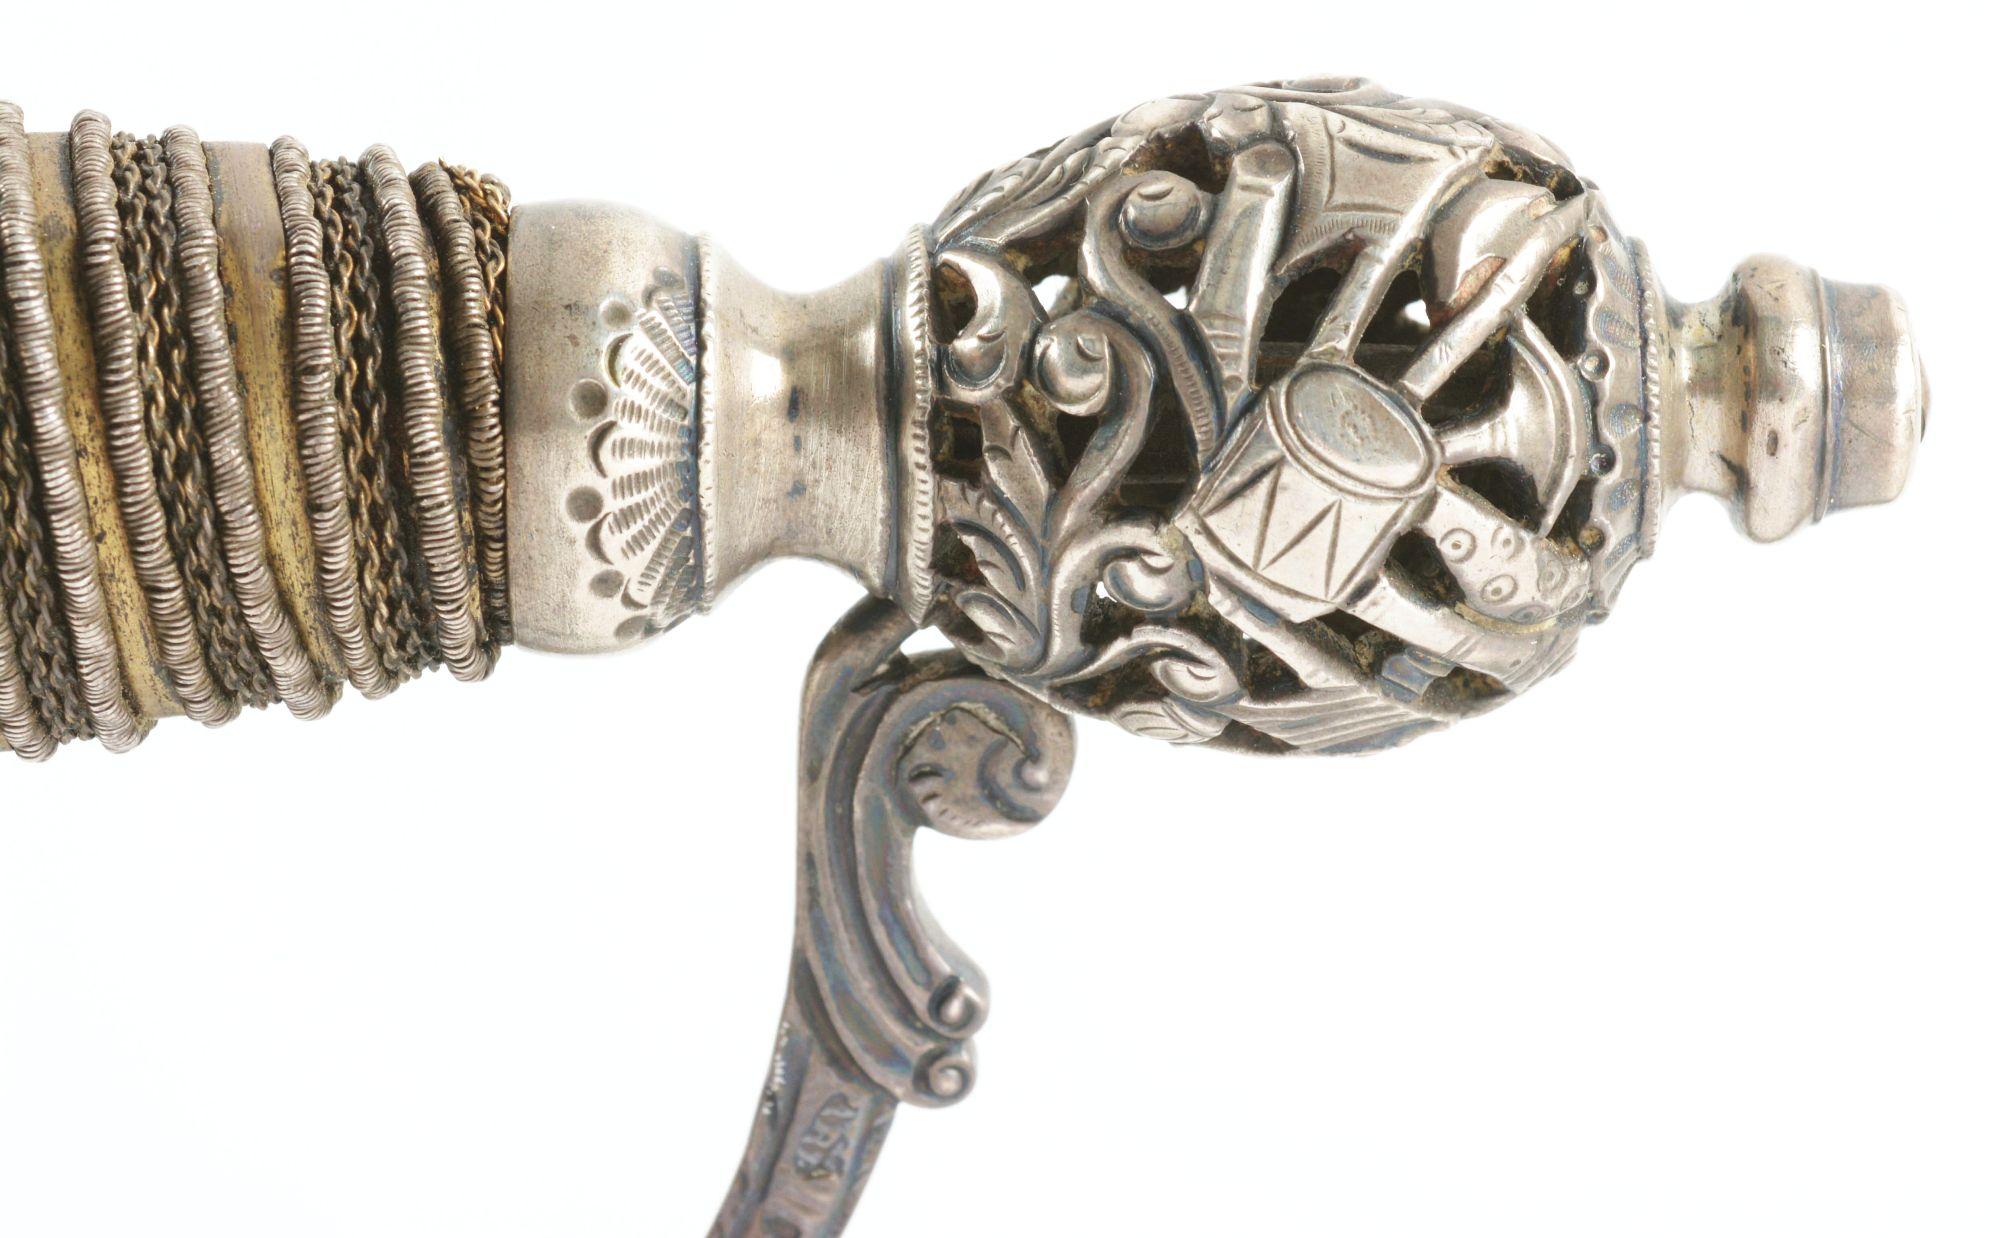 EXTREMELY FINE SILVER-HILTED ENGLISH SMALL SWORD.